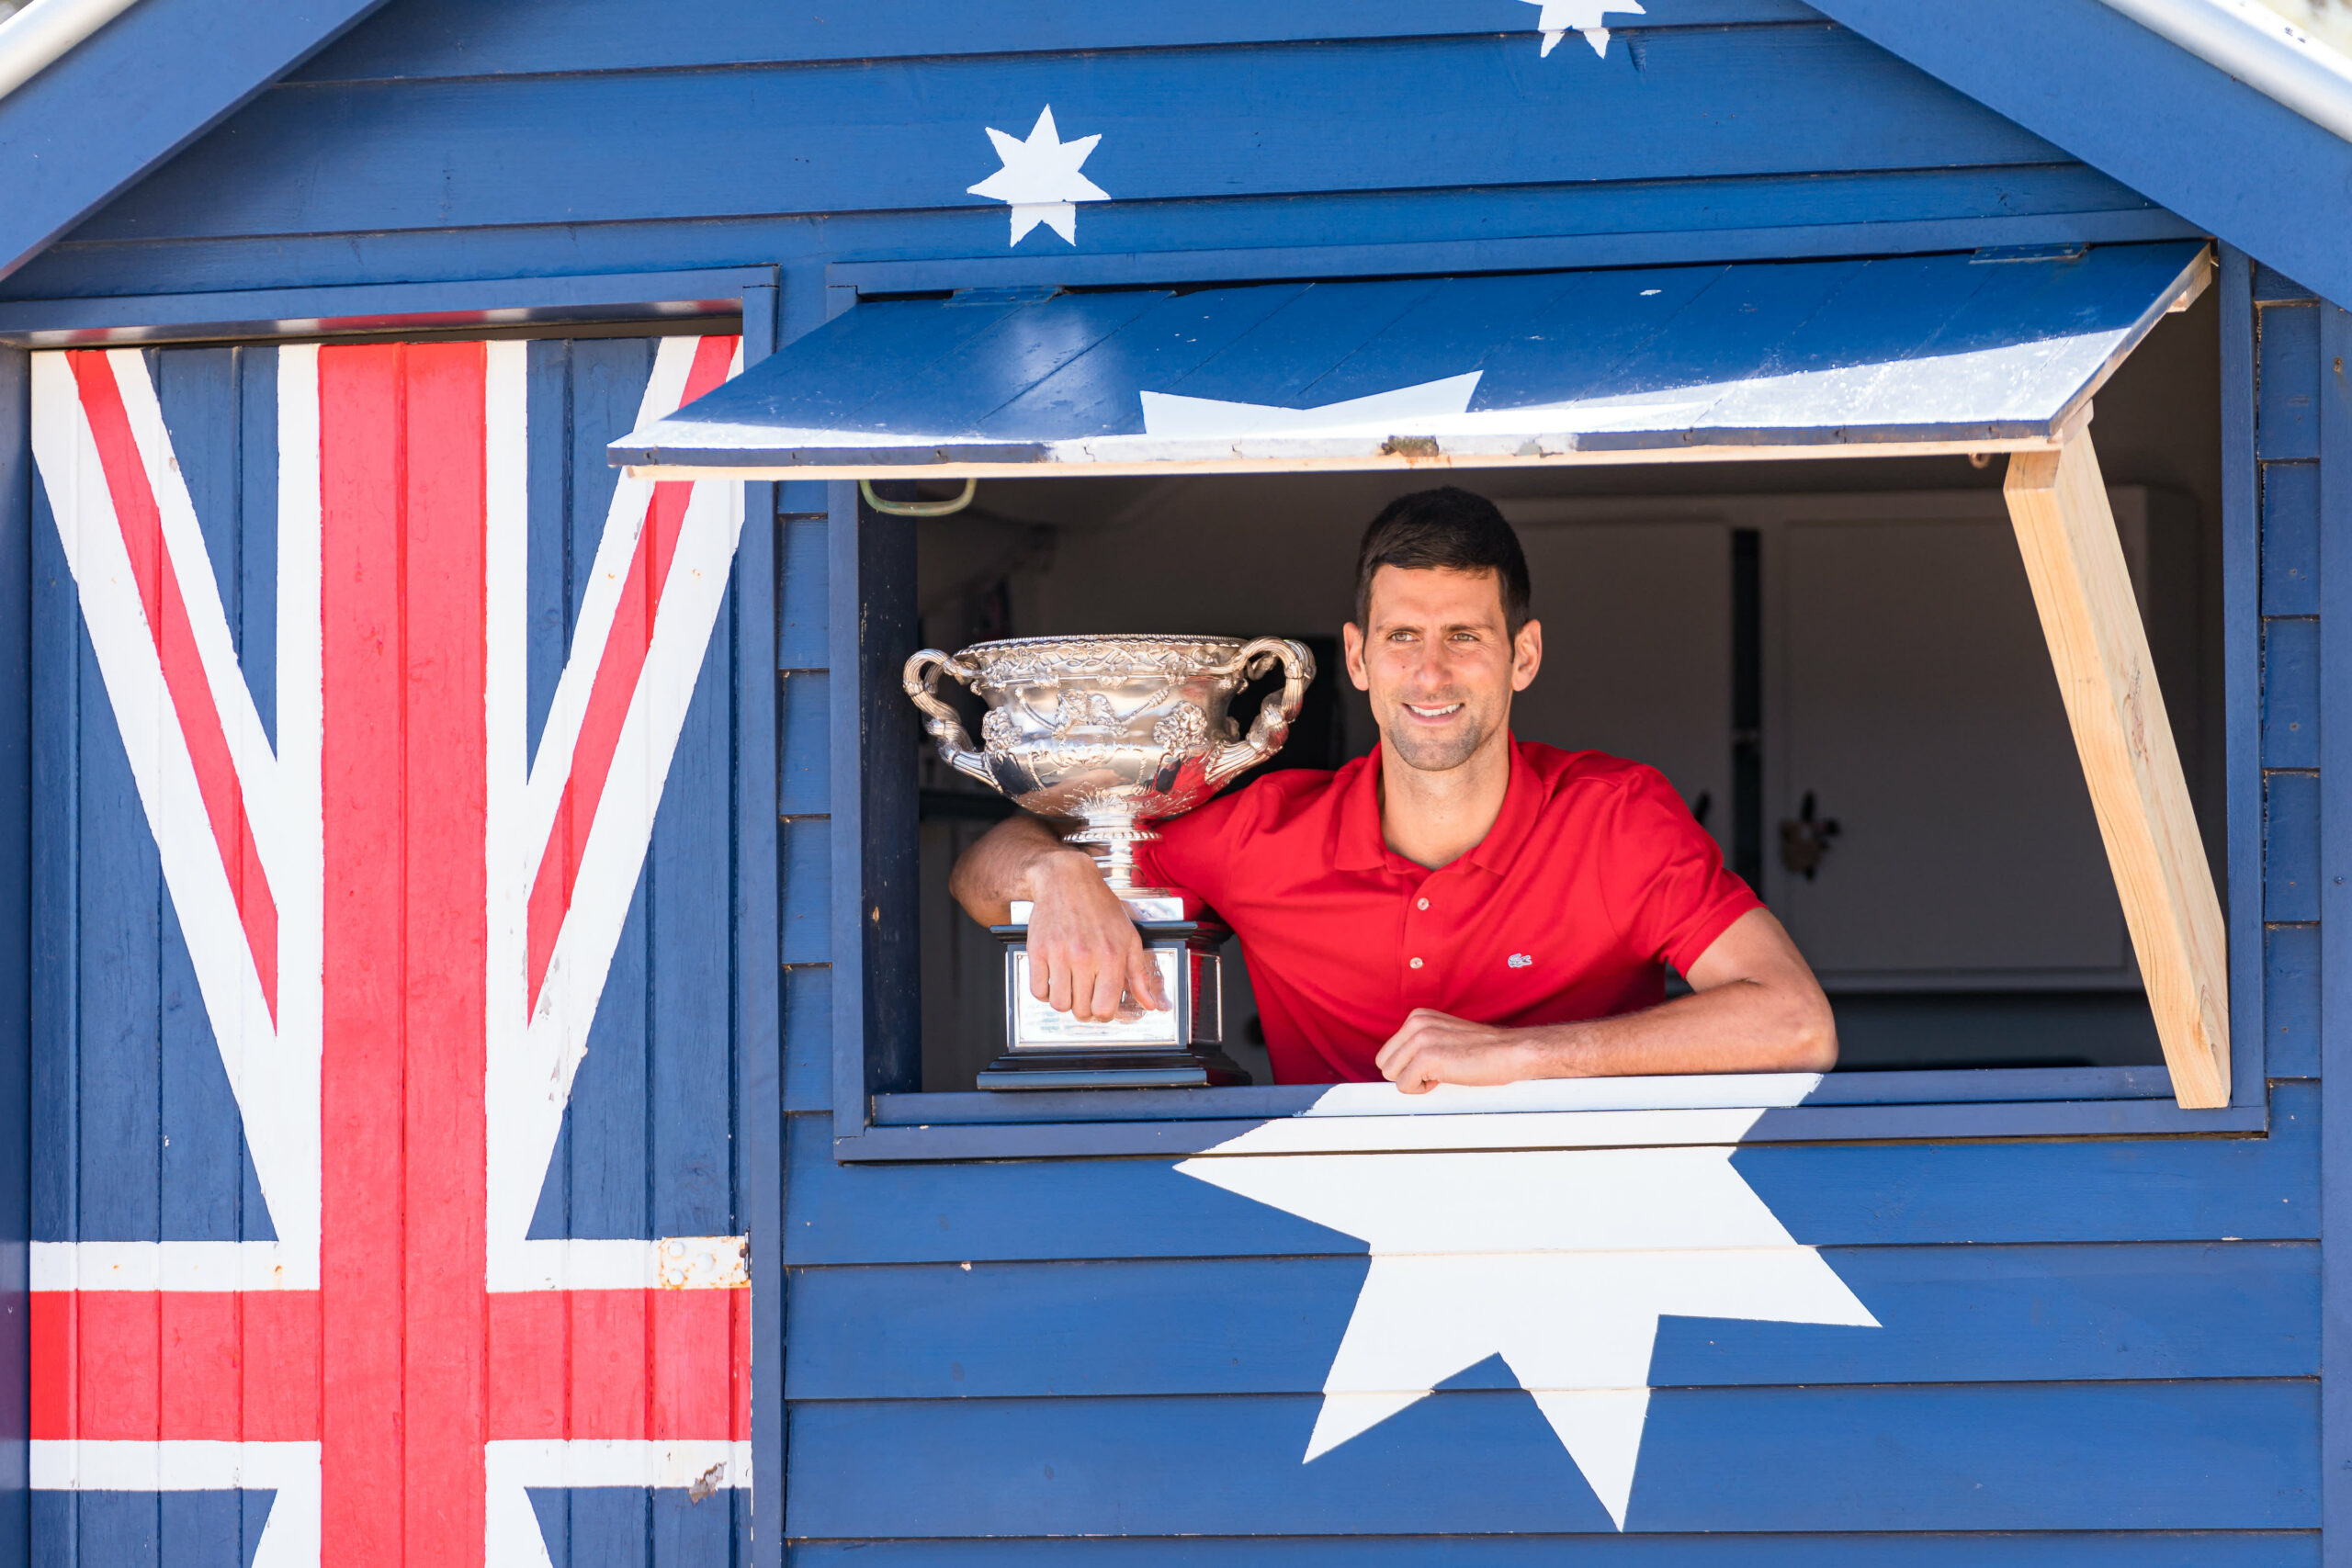 Novak Djokovic thanks supporters; He’s ‘free to leave any time’, Australia minister says